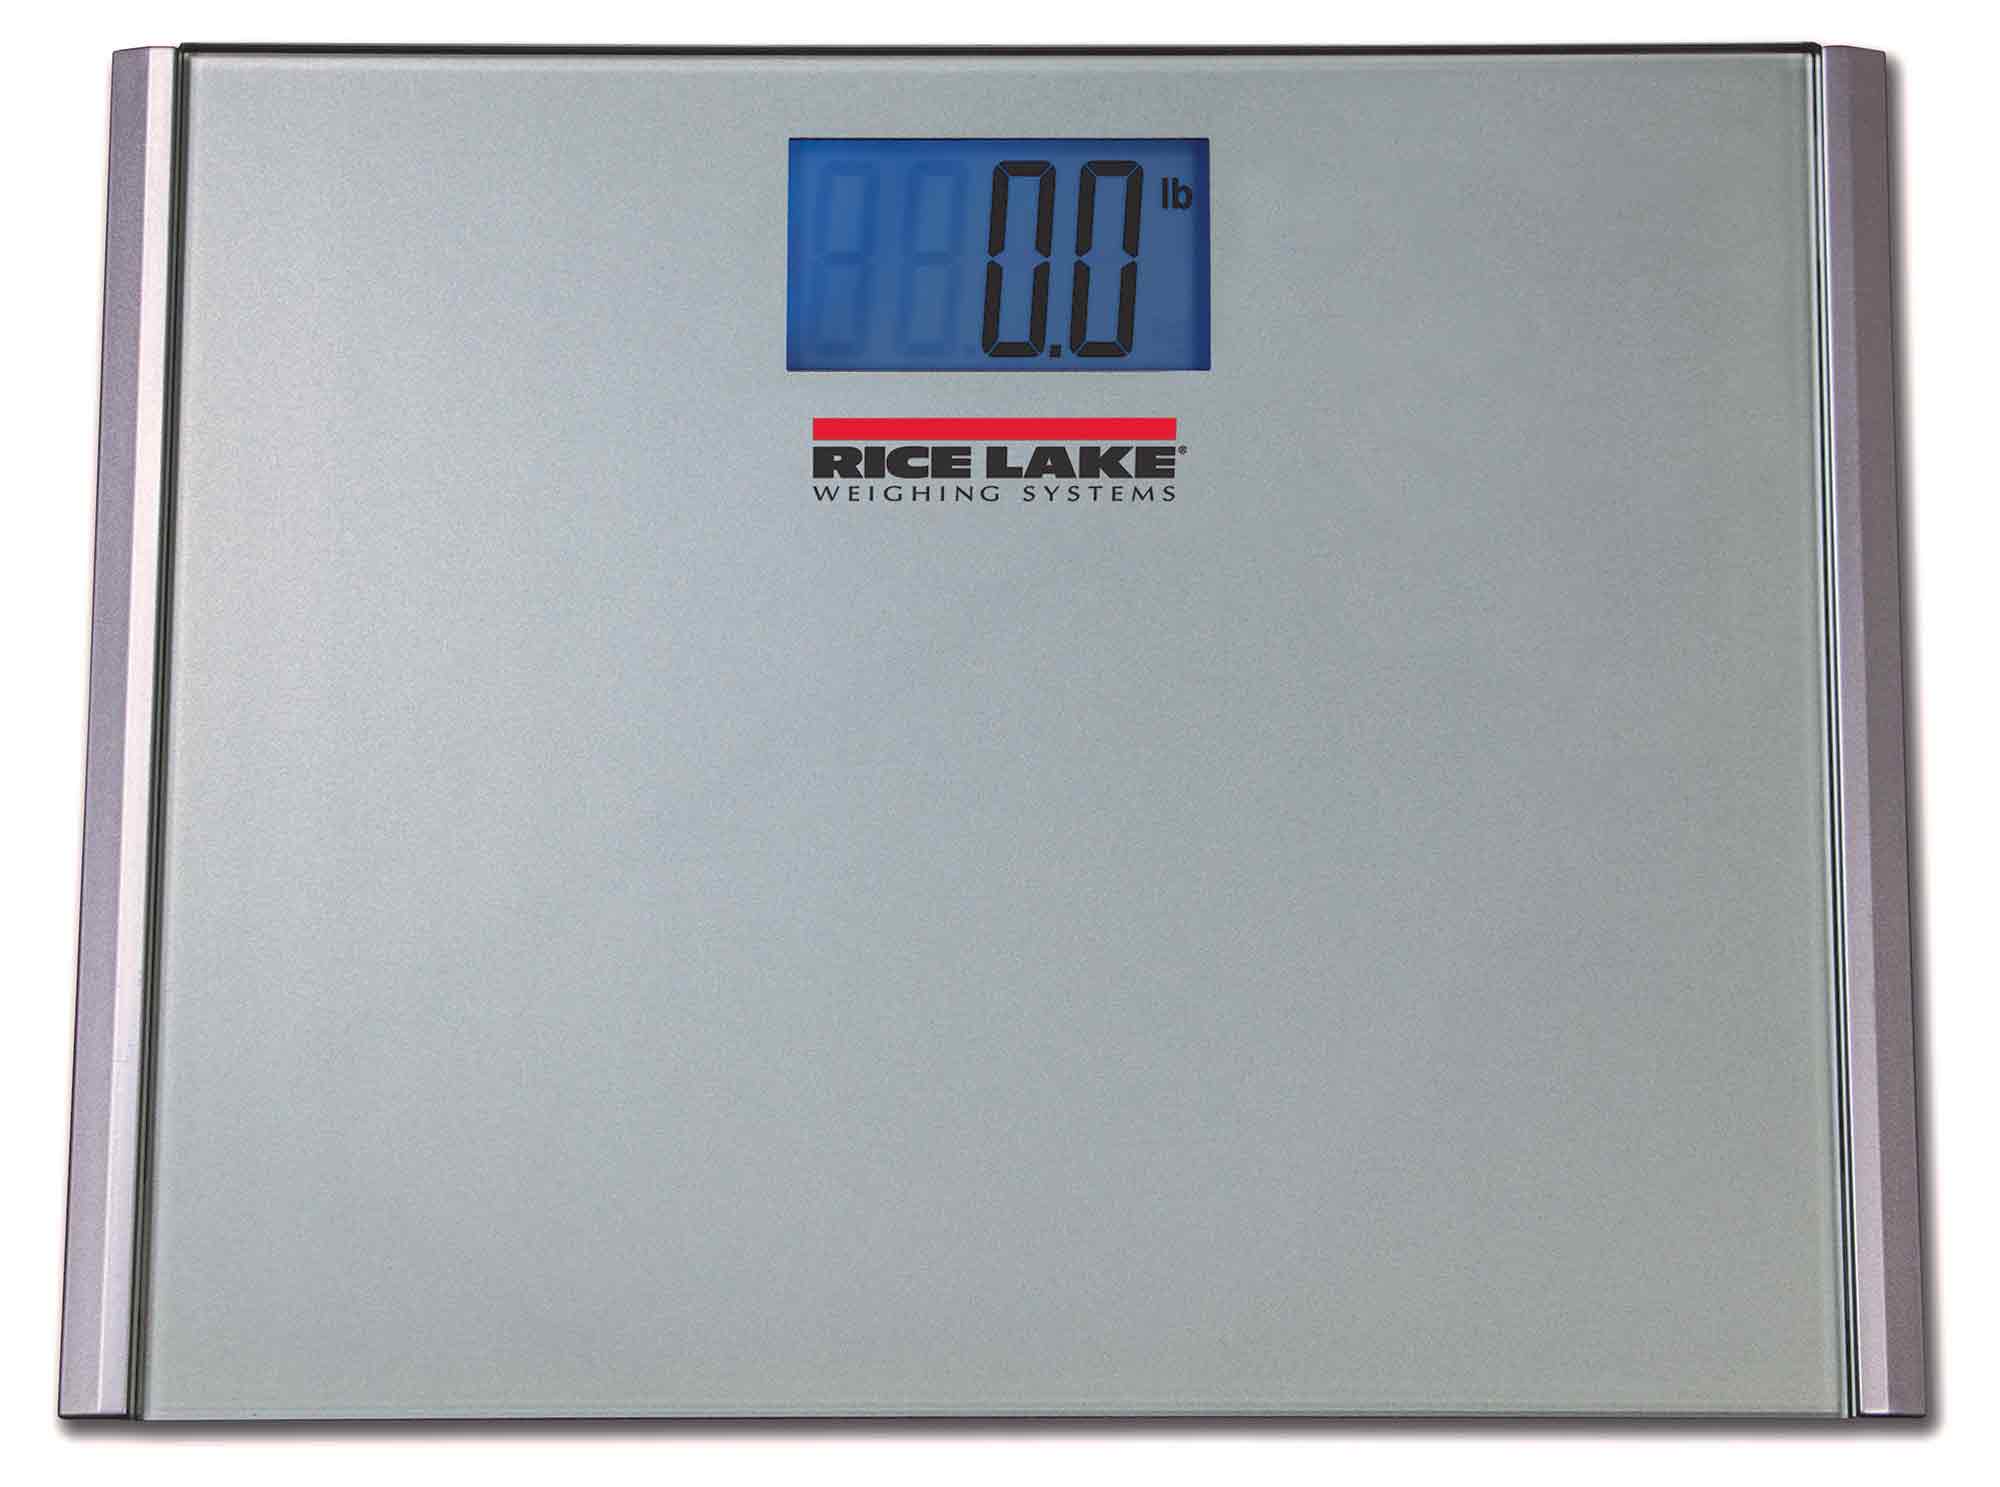 Rice Lake 201124 440lb x 0.2lb, DHH-10 Digital Home Health Scale with 1 year Warranty